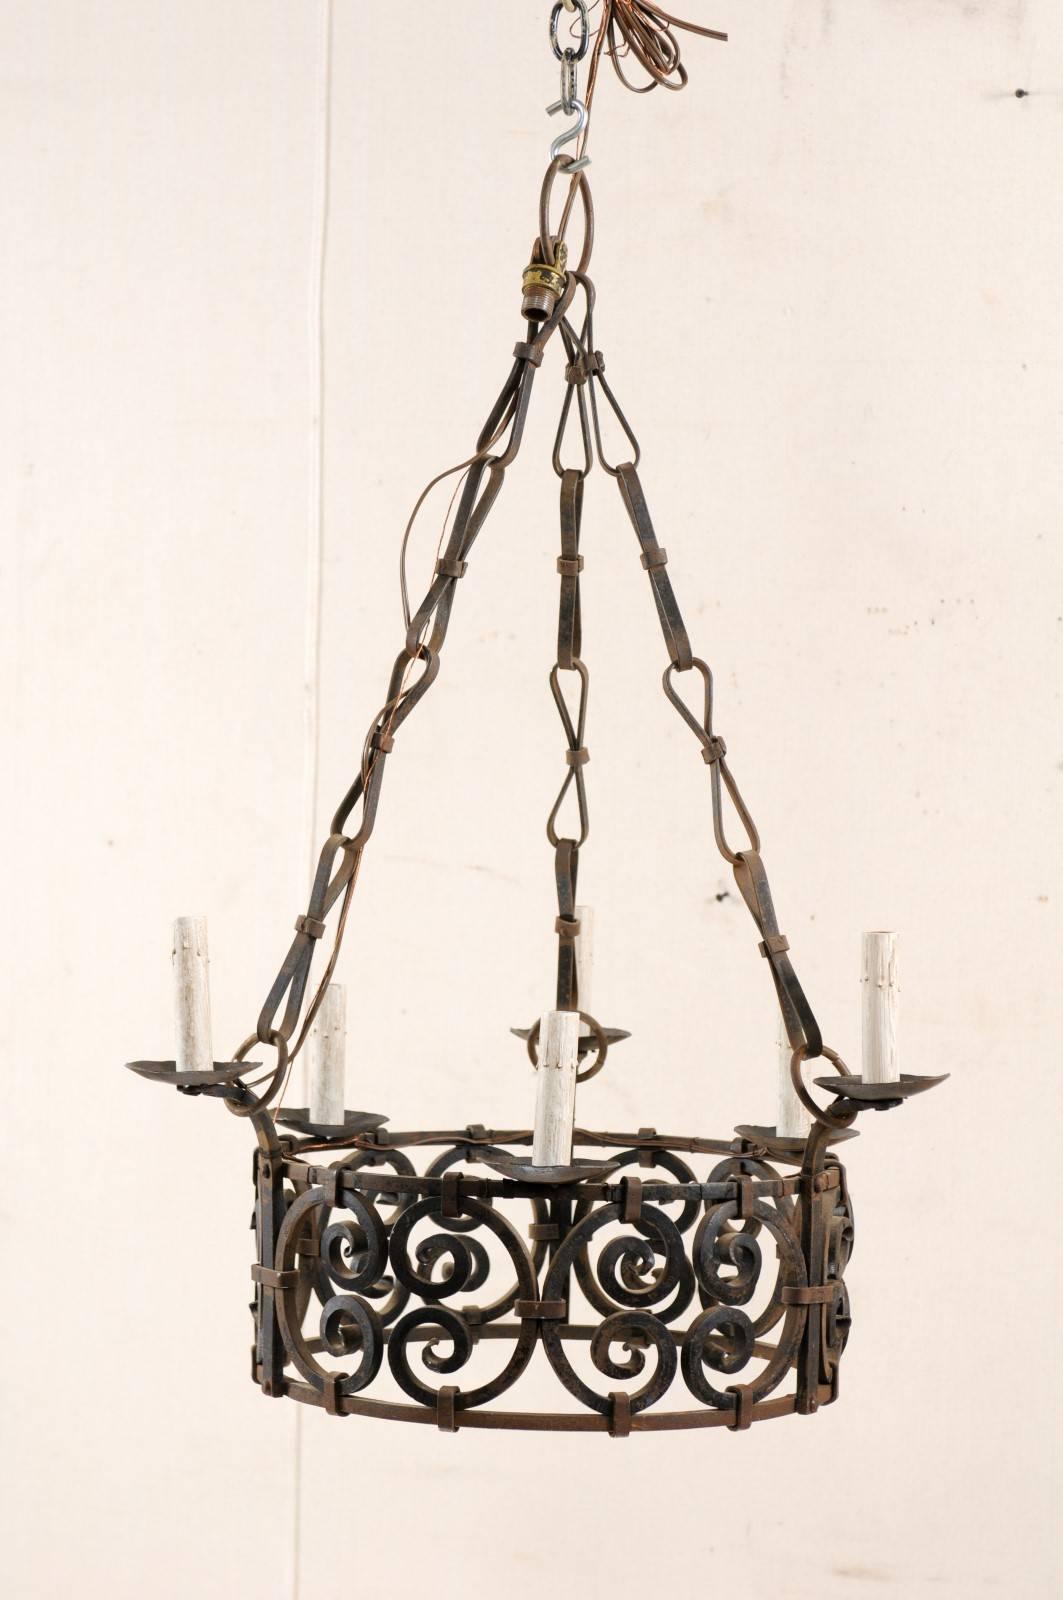 A French vintage six-light iron chandelier in a round ring shape. This French chandelier from the mid-20th century features an intricately designed centre comprised of c-scroll motifs about its ring. There are six short arms that lift slightly above